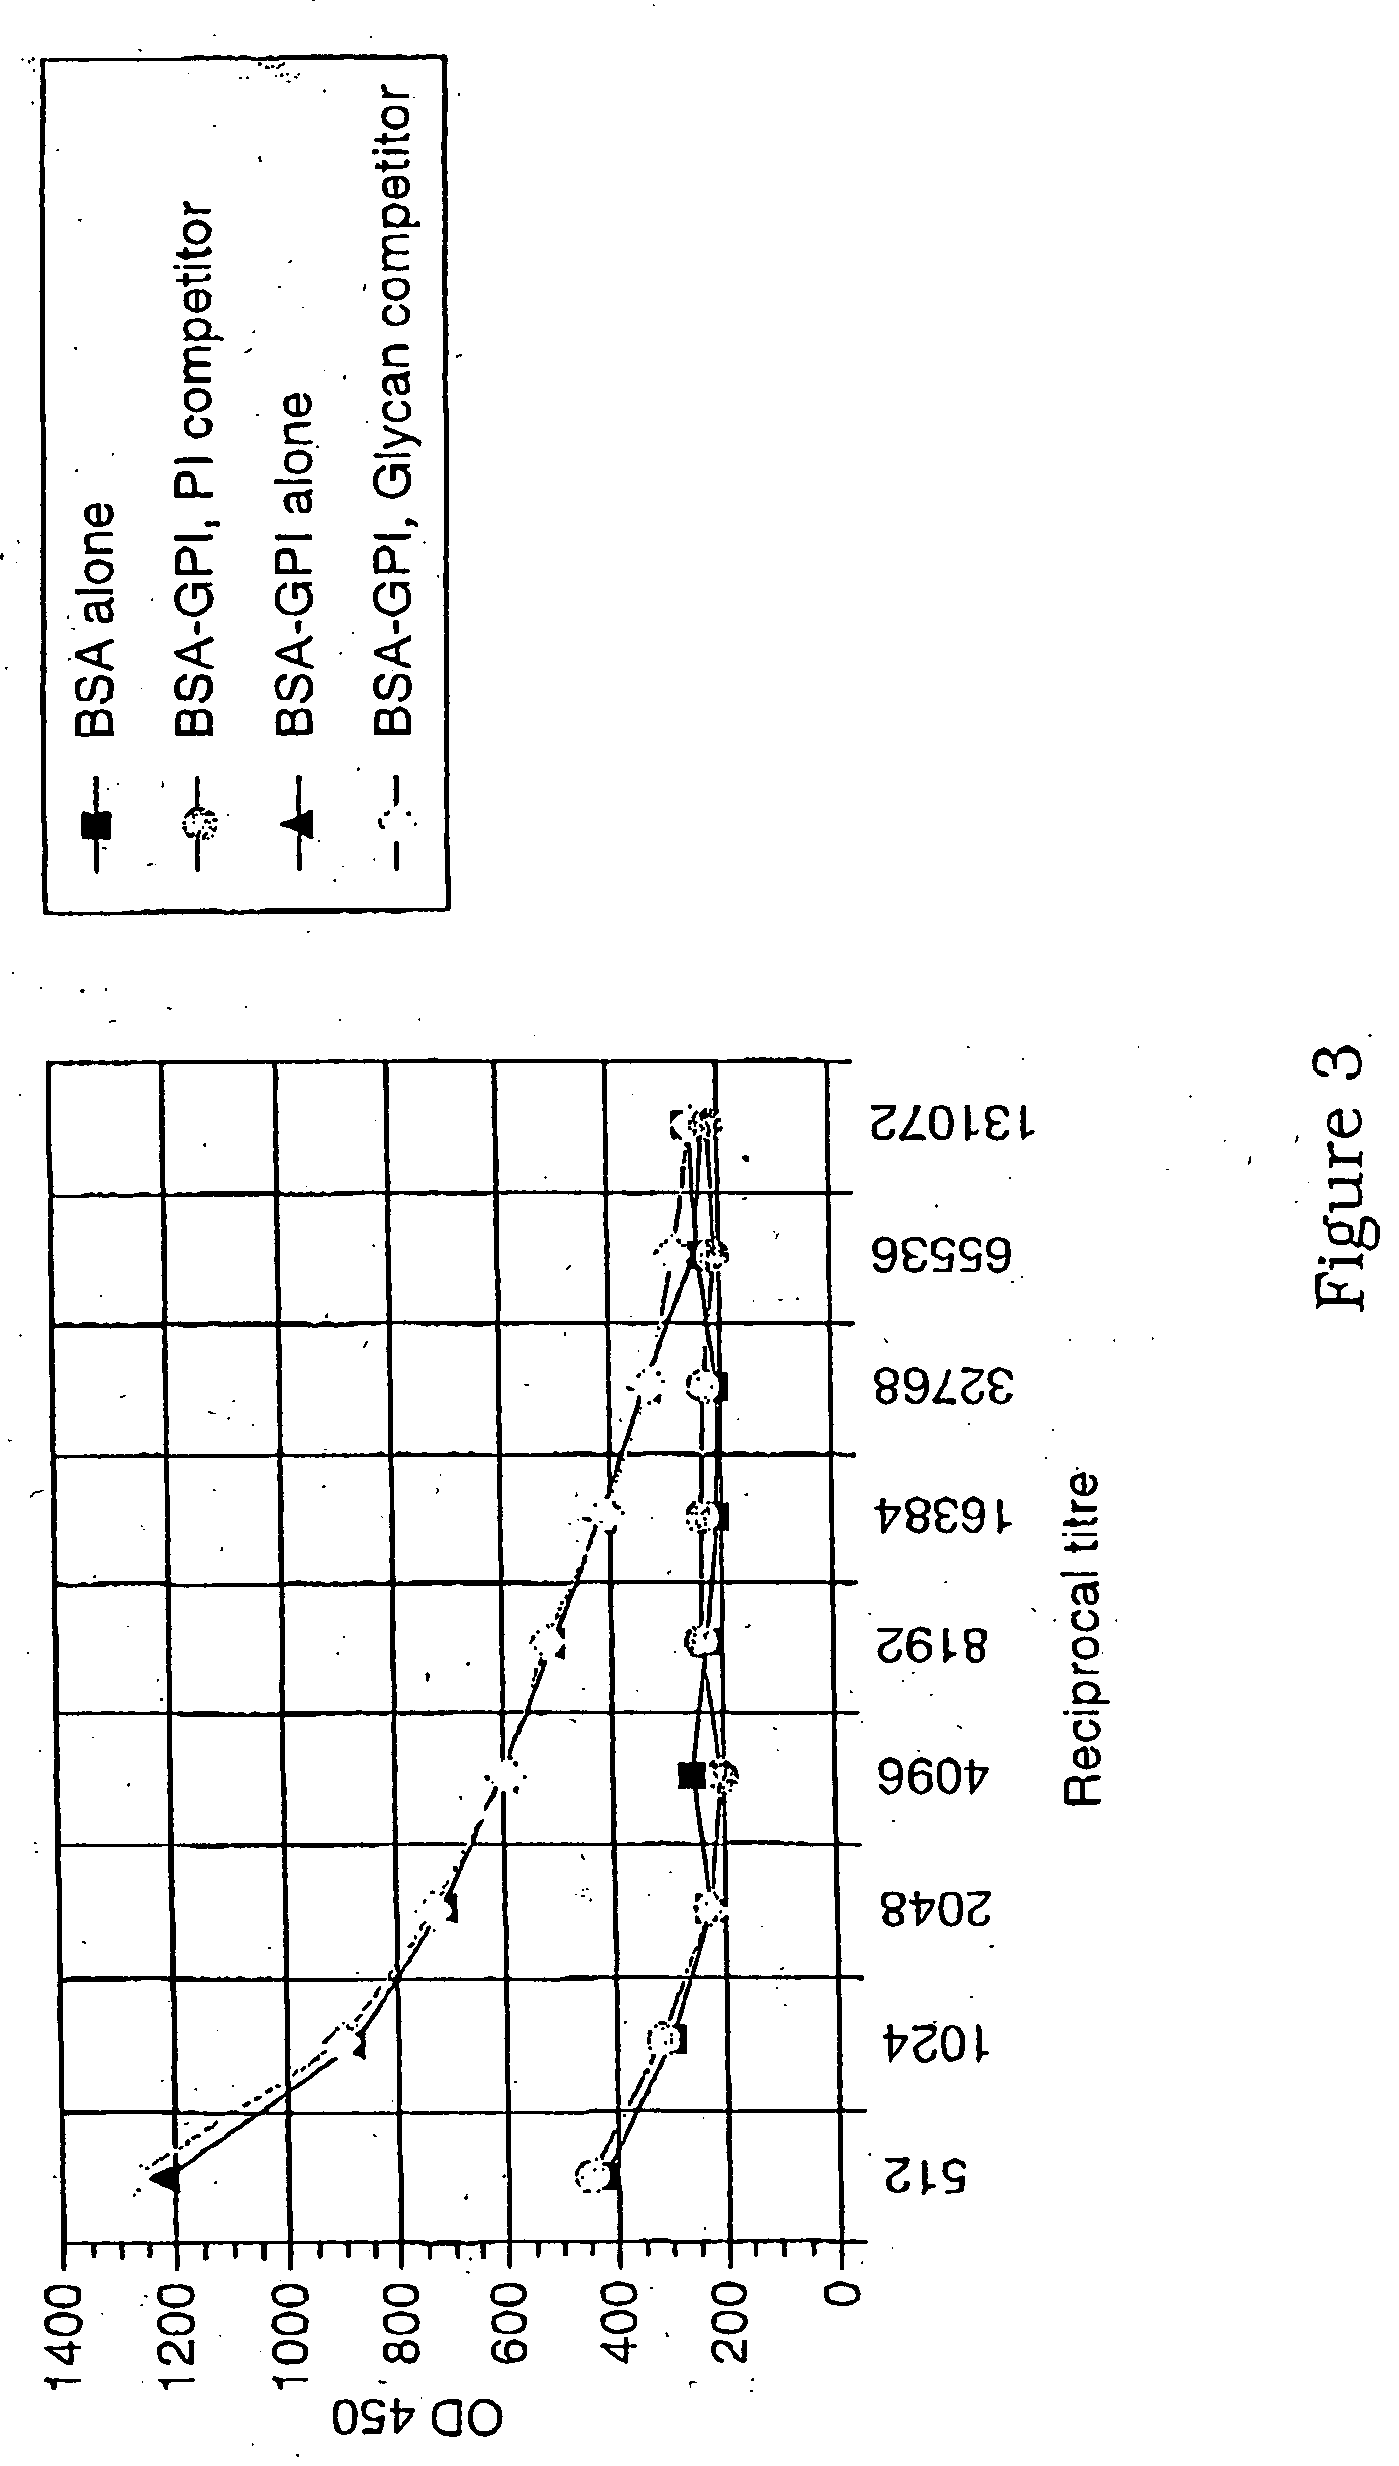 Immunogenic compositions and diagnostic and therapeutic uses thereof